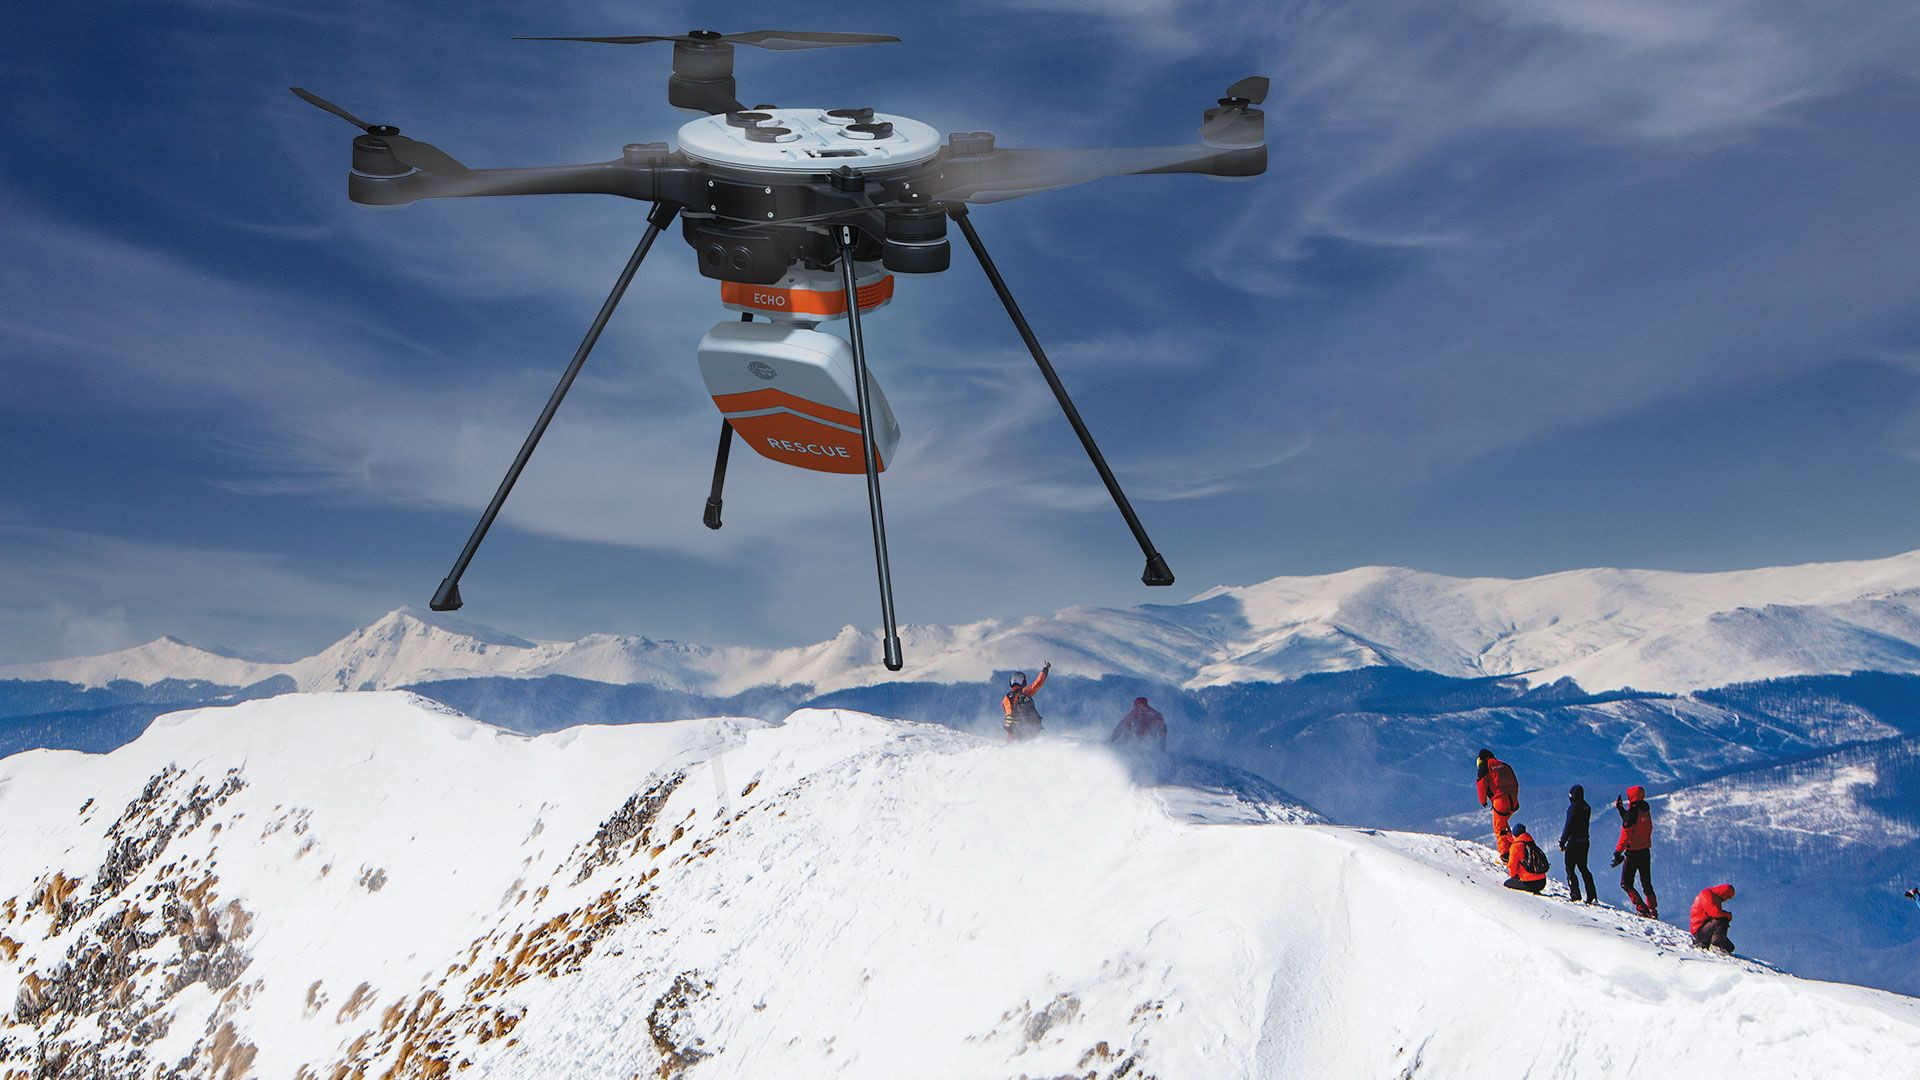 Air Ambulance Drones: The Next Frontier In Emergency Response